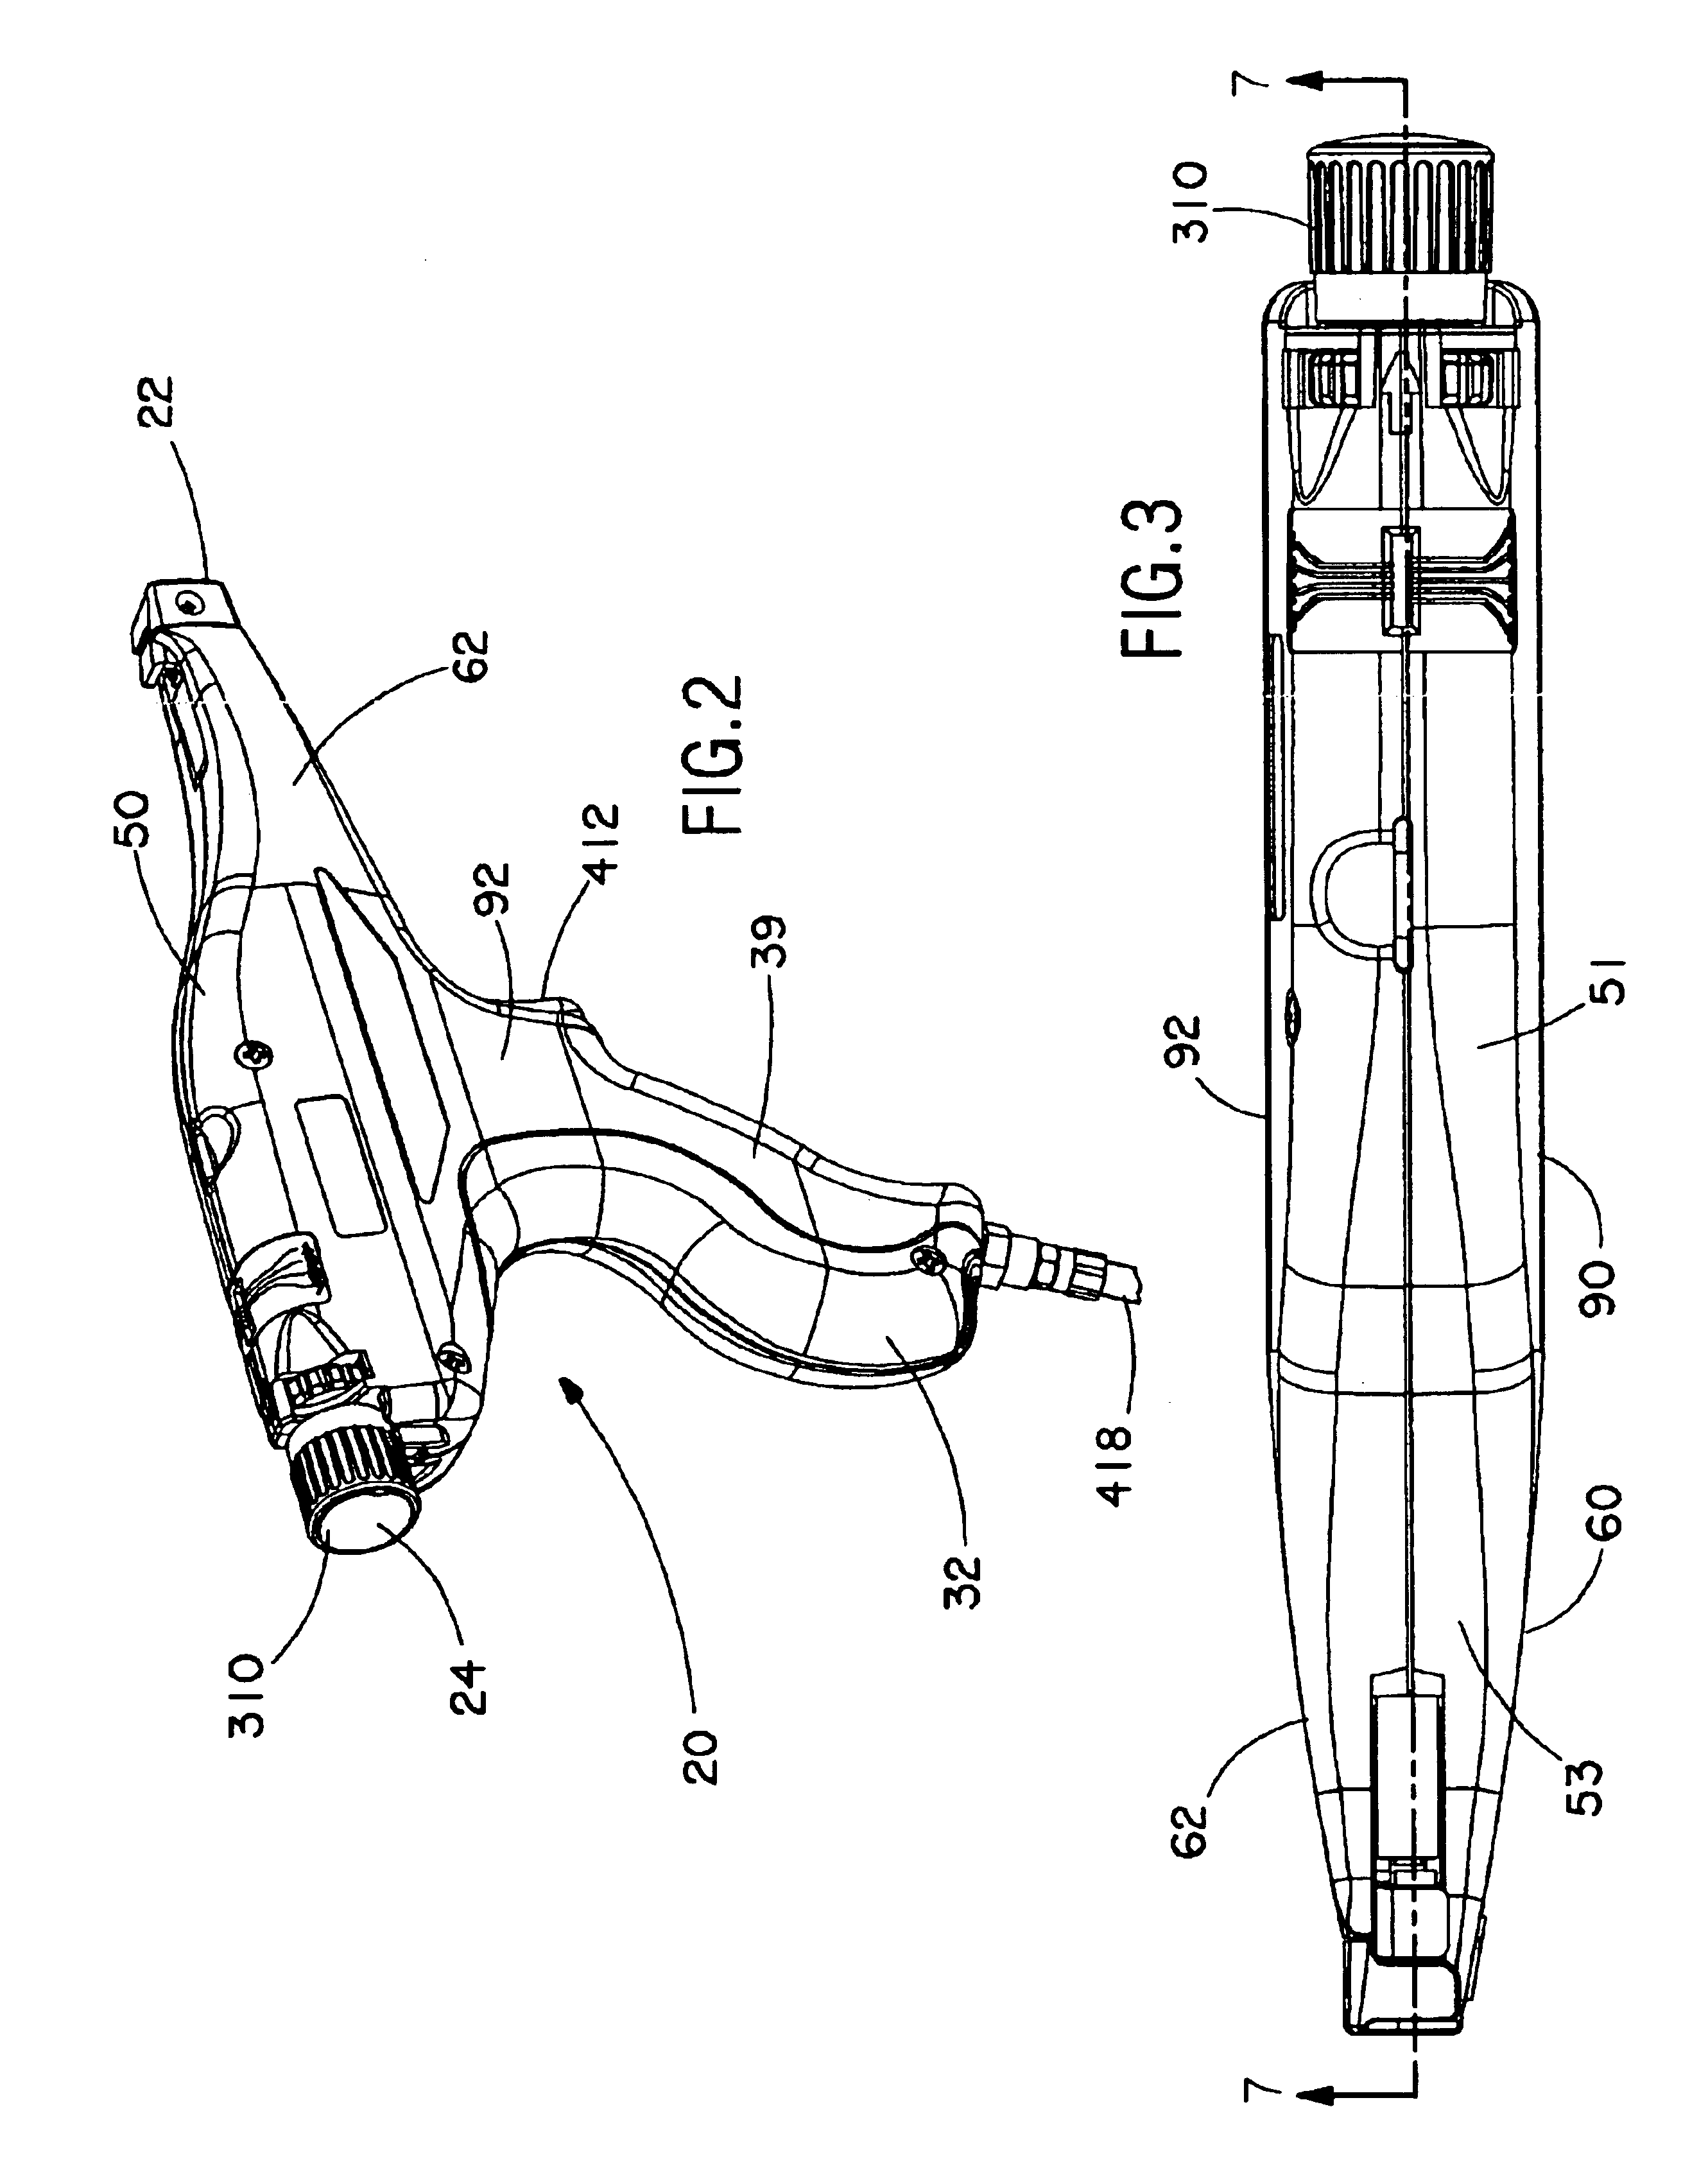 Pneumatic cable tie tool